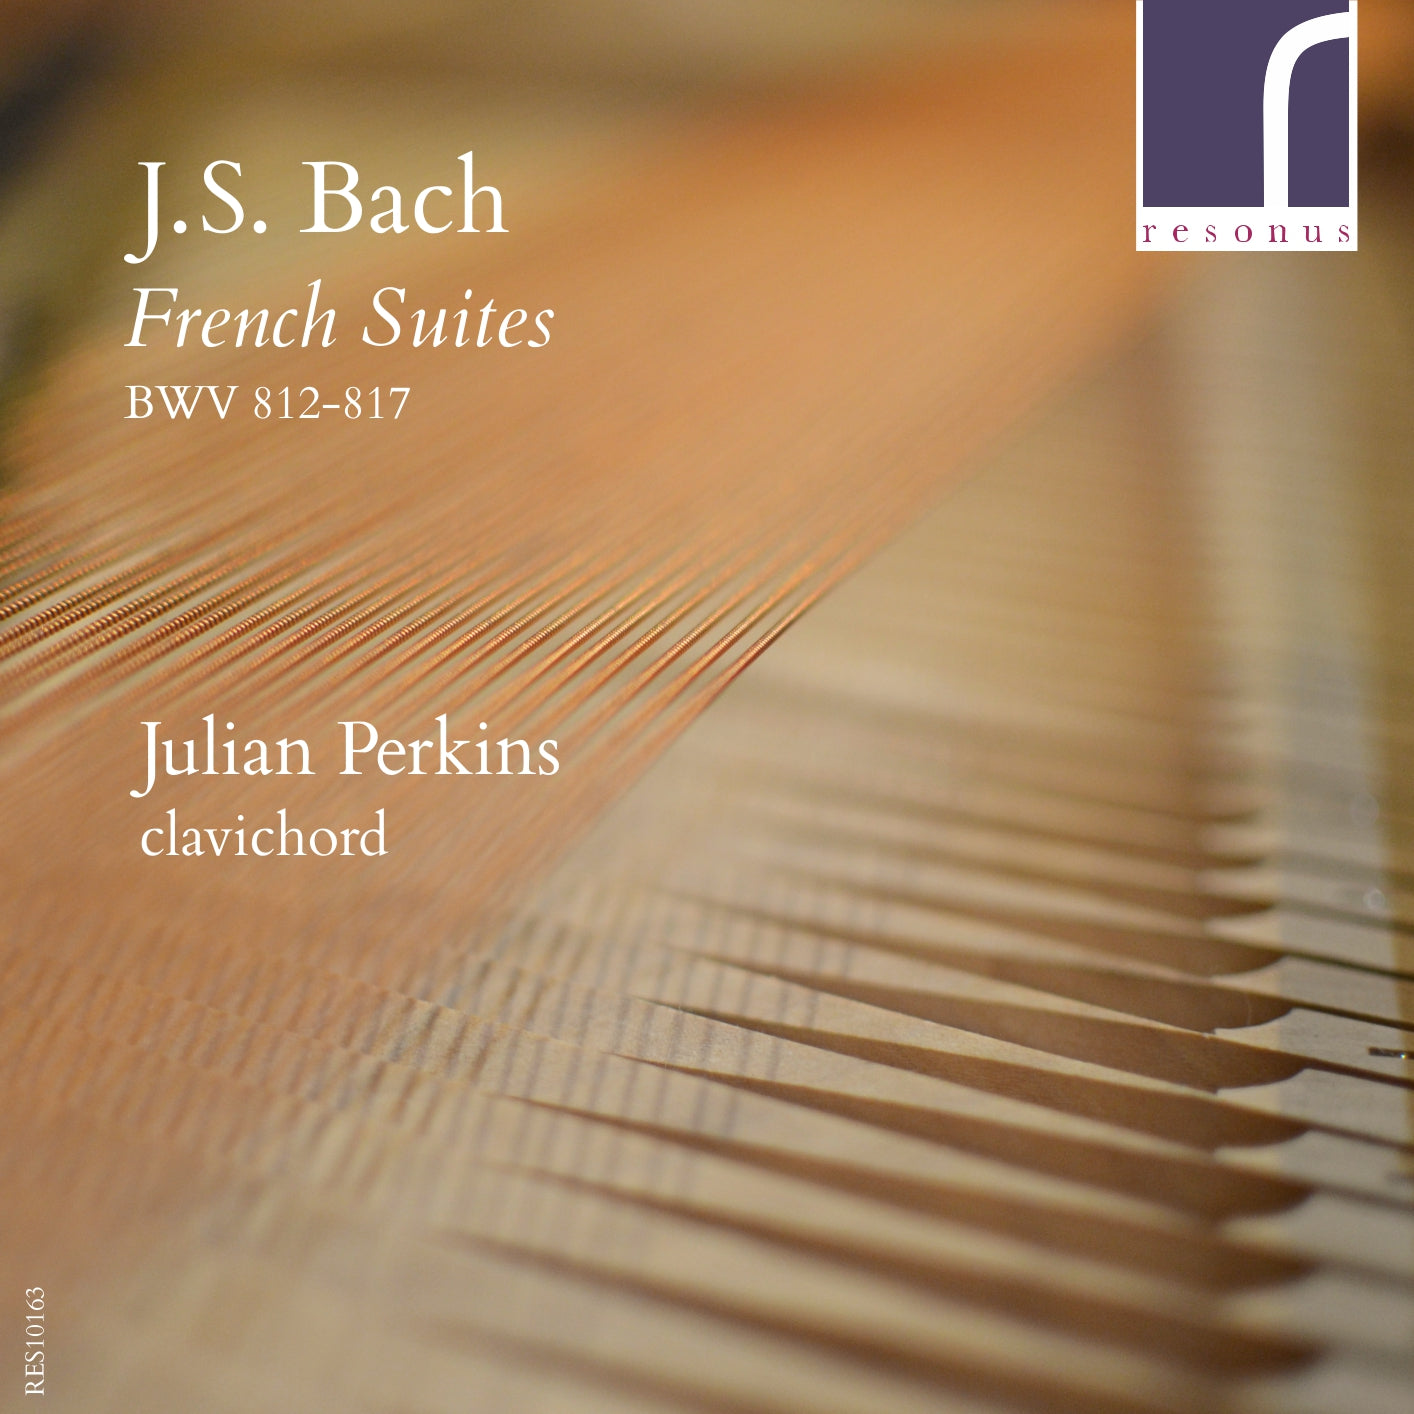 J.S. Bach: French Suites, BWV 812-817